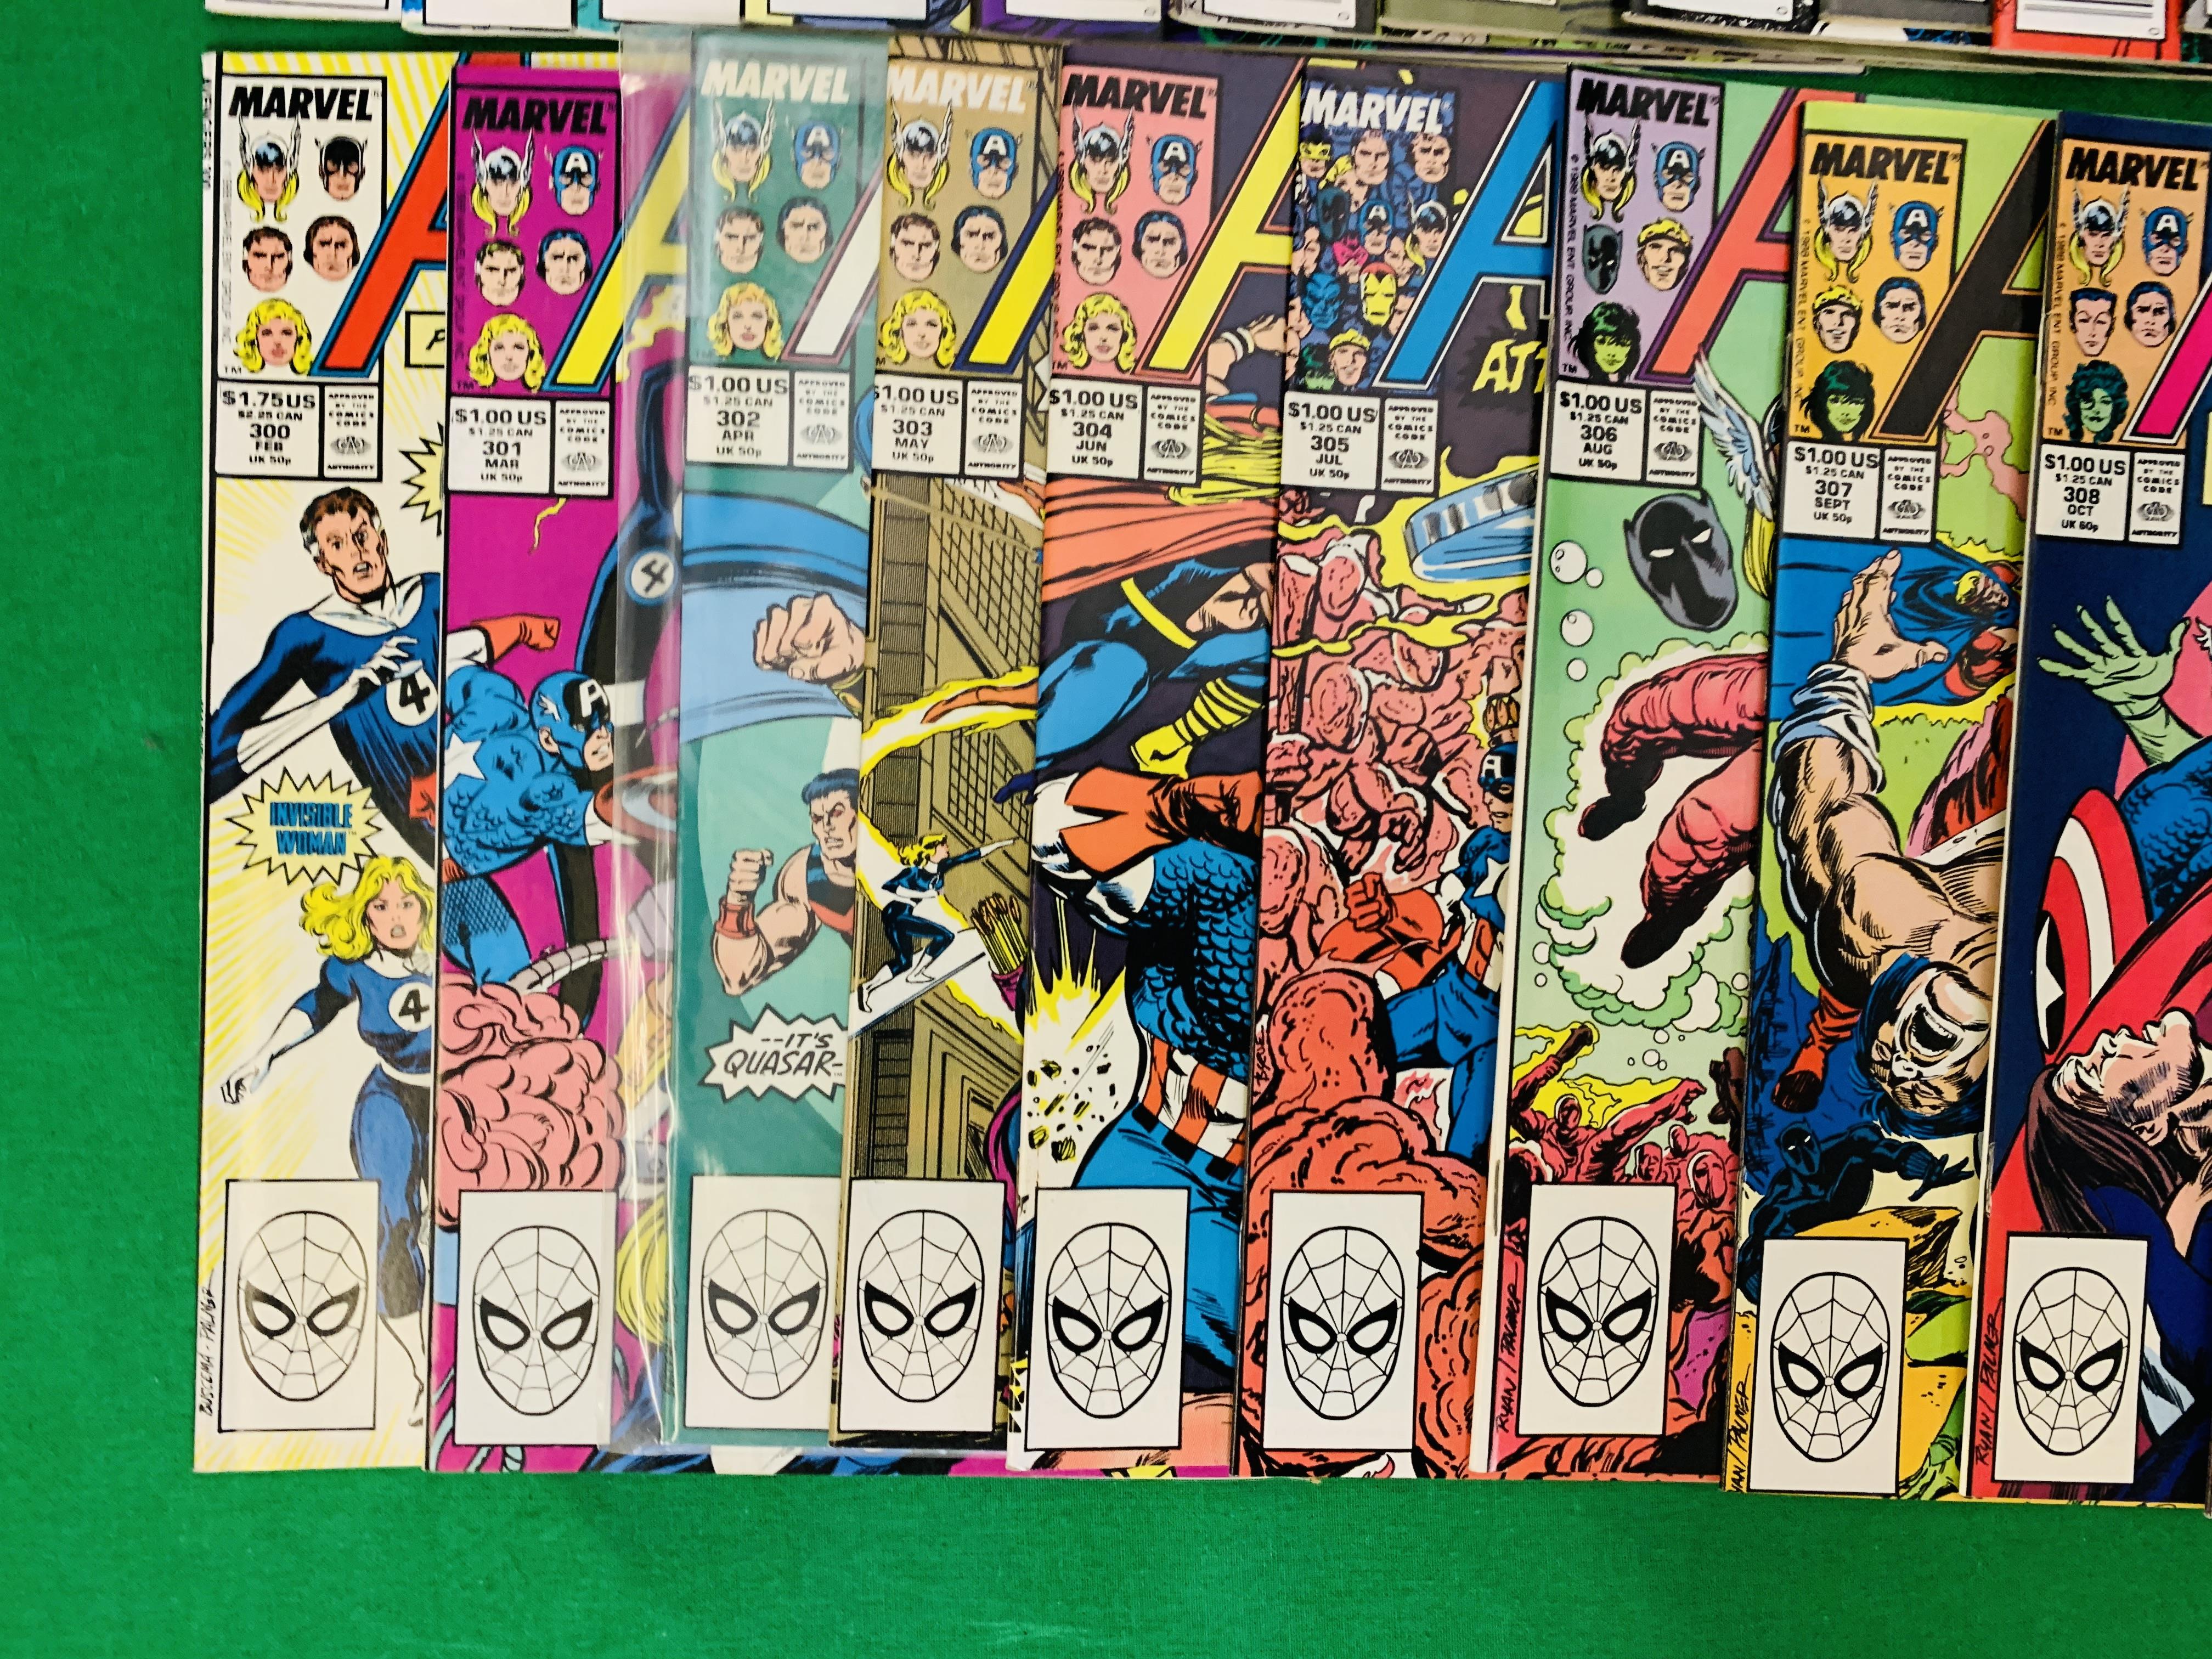 MARVEL COMICS THE AVENGERS NO. 300 - 402, MISSING ISSUES 325, 329 AND 334. - Image 2 of 16